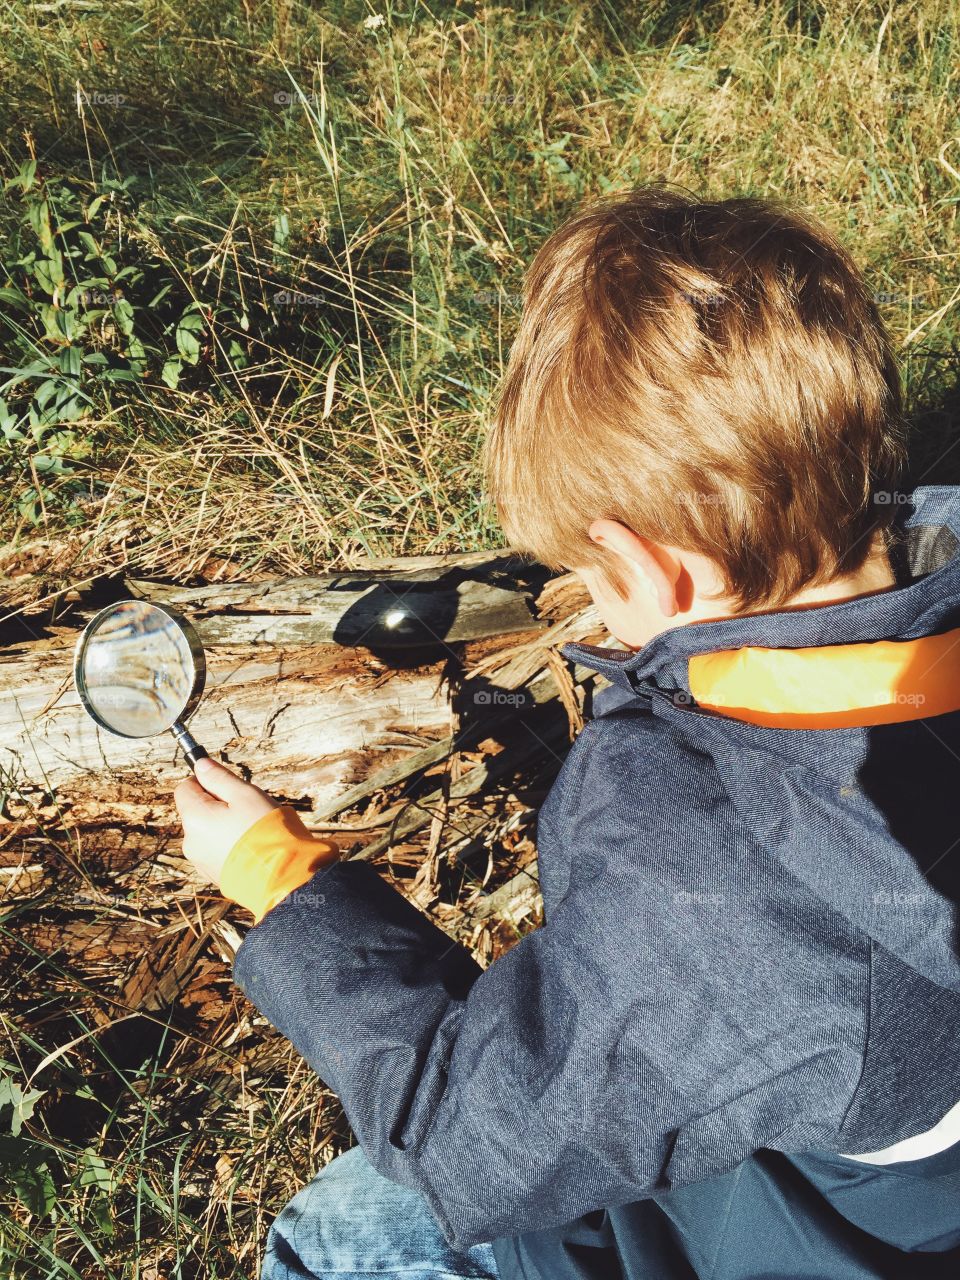 Burning a tree with a loupe. Five year old boy burning wood with a loupe